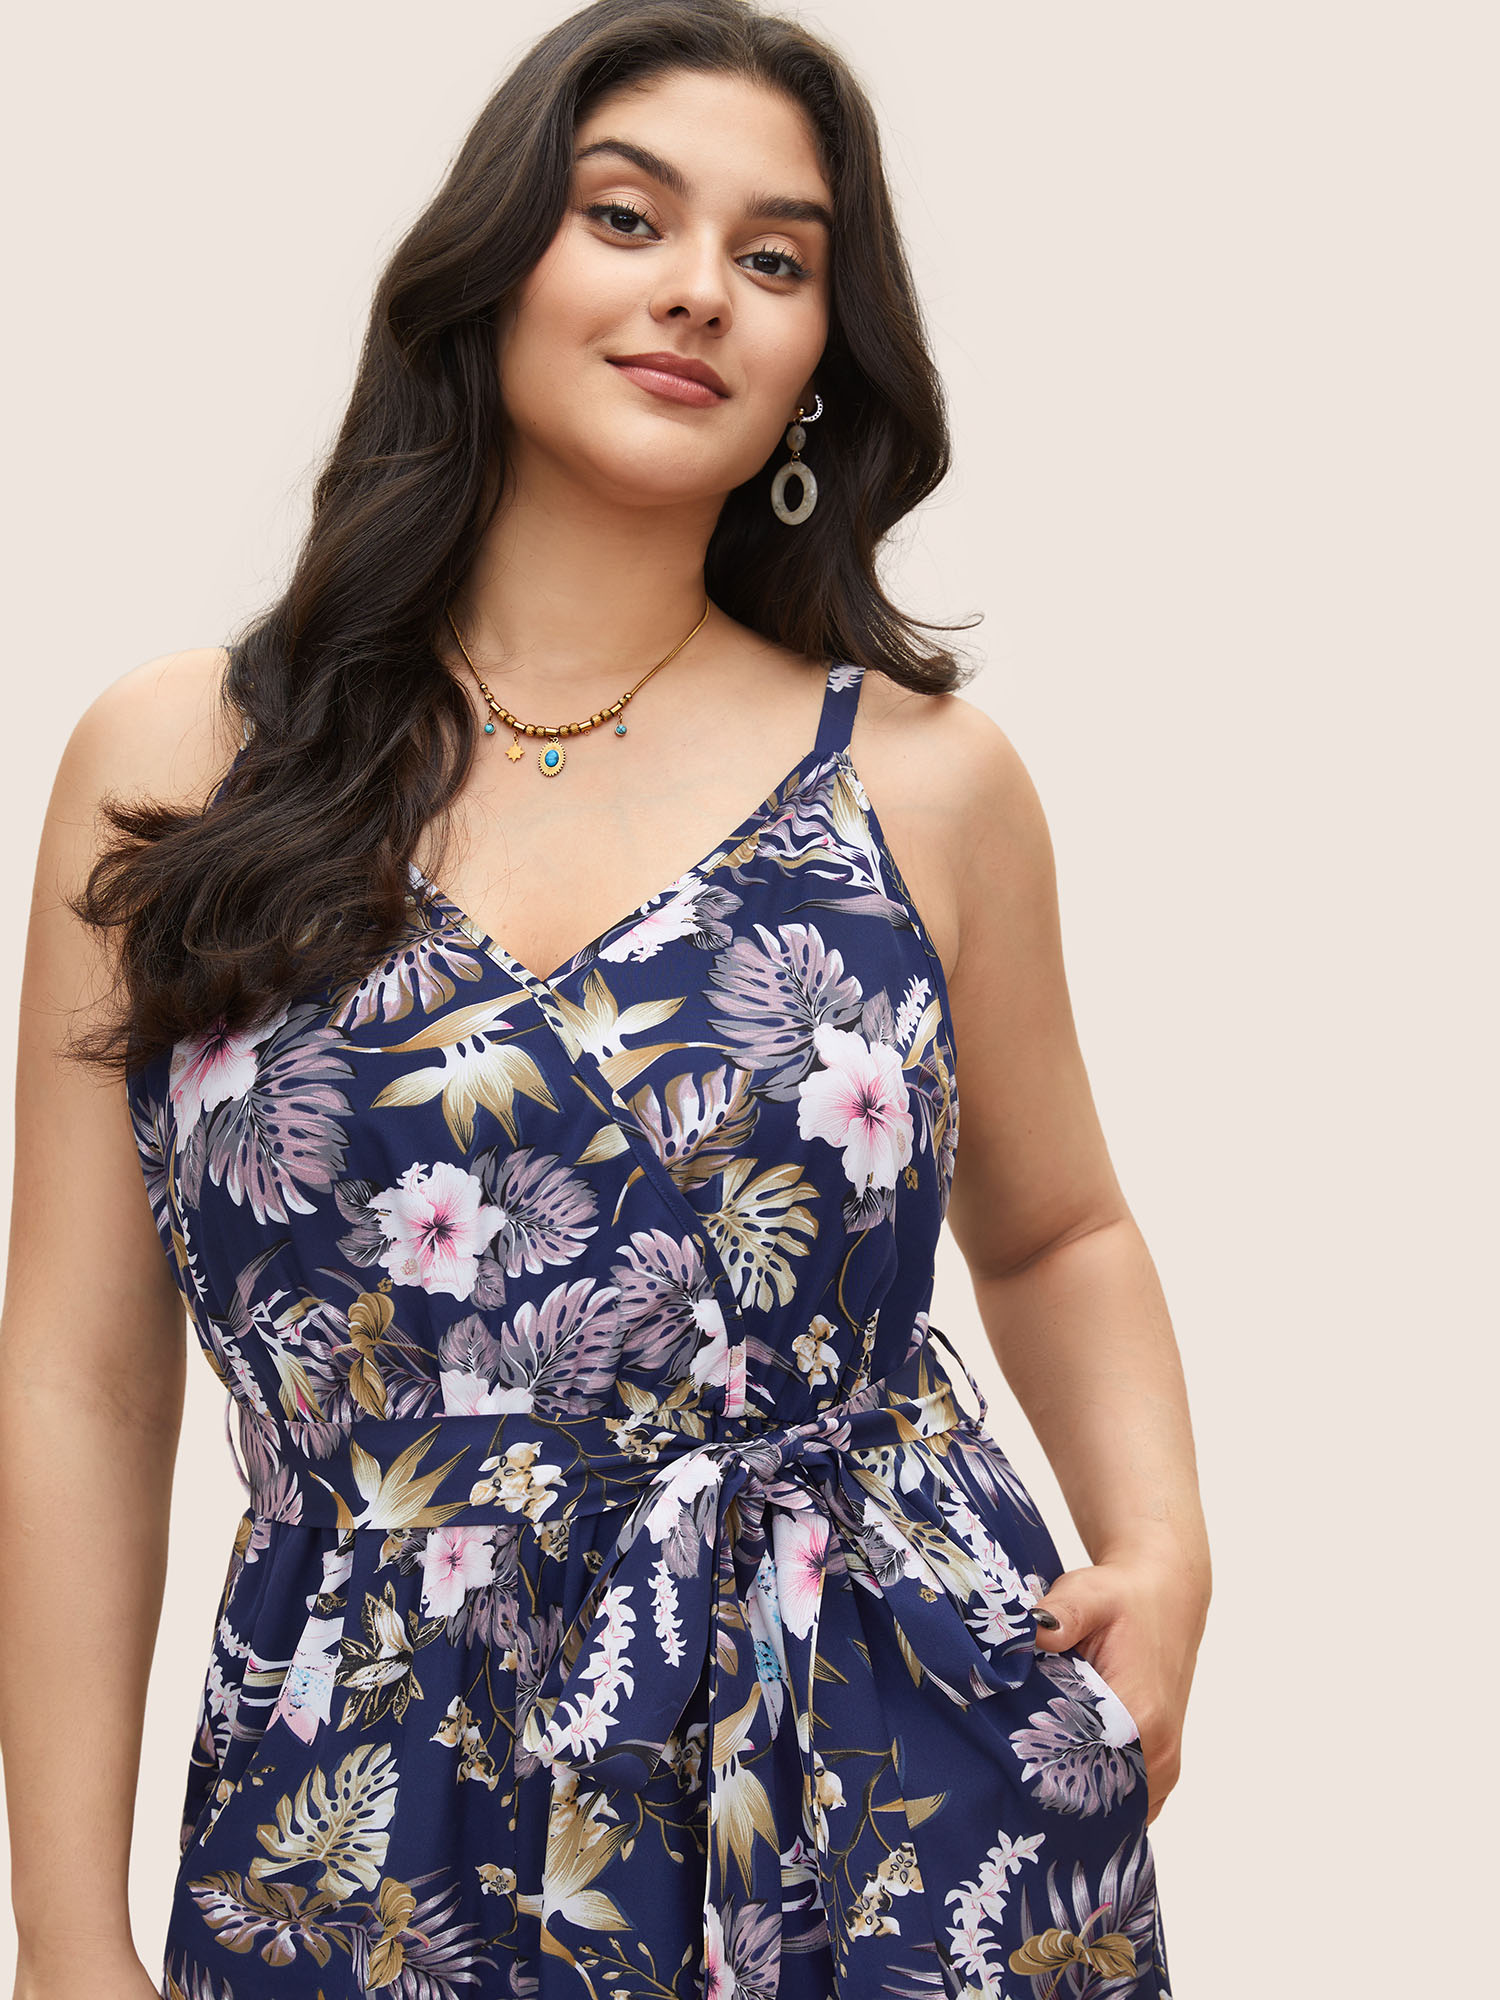 

Vacation Floral Rouge Ties Sleeveless Plus Size Camisole Jumpsuits Women Holiday Vacation Spaghetti Strap Pocket Belt Dailywear Jumpsuits BloomChic, Darkblue